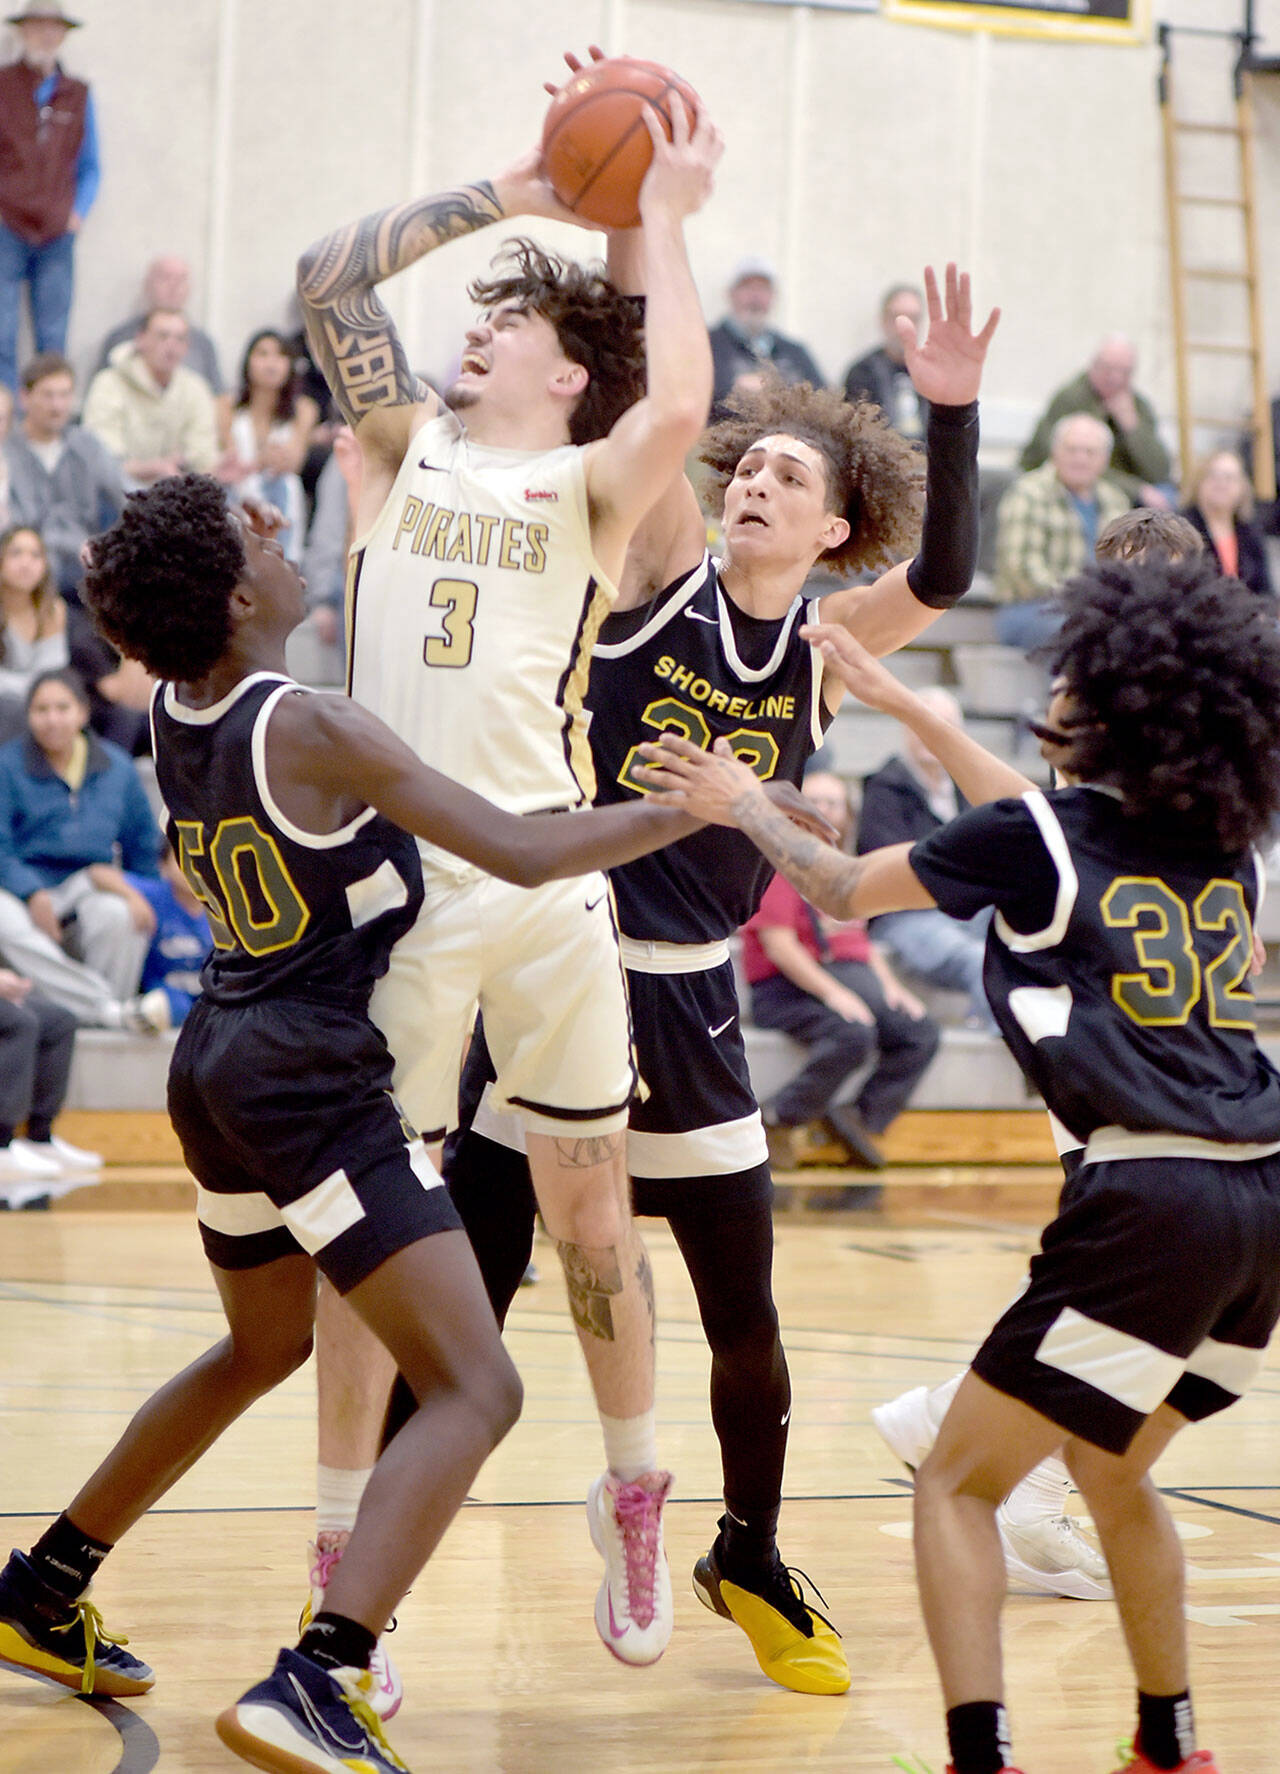 Peninsula’s Aiden Olmstead, center, shoots for the hoop surrounded by Shoreline defenders, from left, Abdoulee Cham, Joel Amaro and Jordon Smalls on Wednesday night in Port Angeles. (Keith Thorpe/Peninsula Daily News)